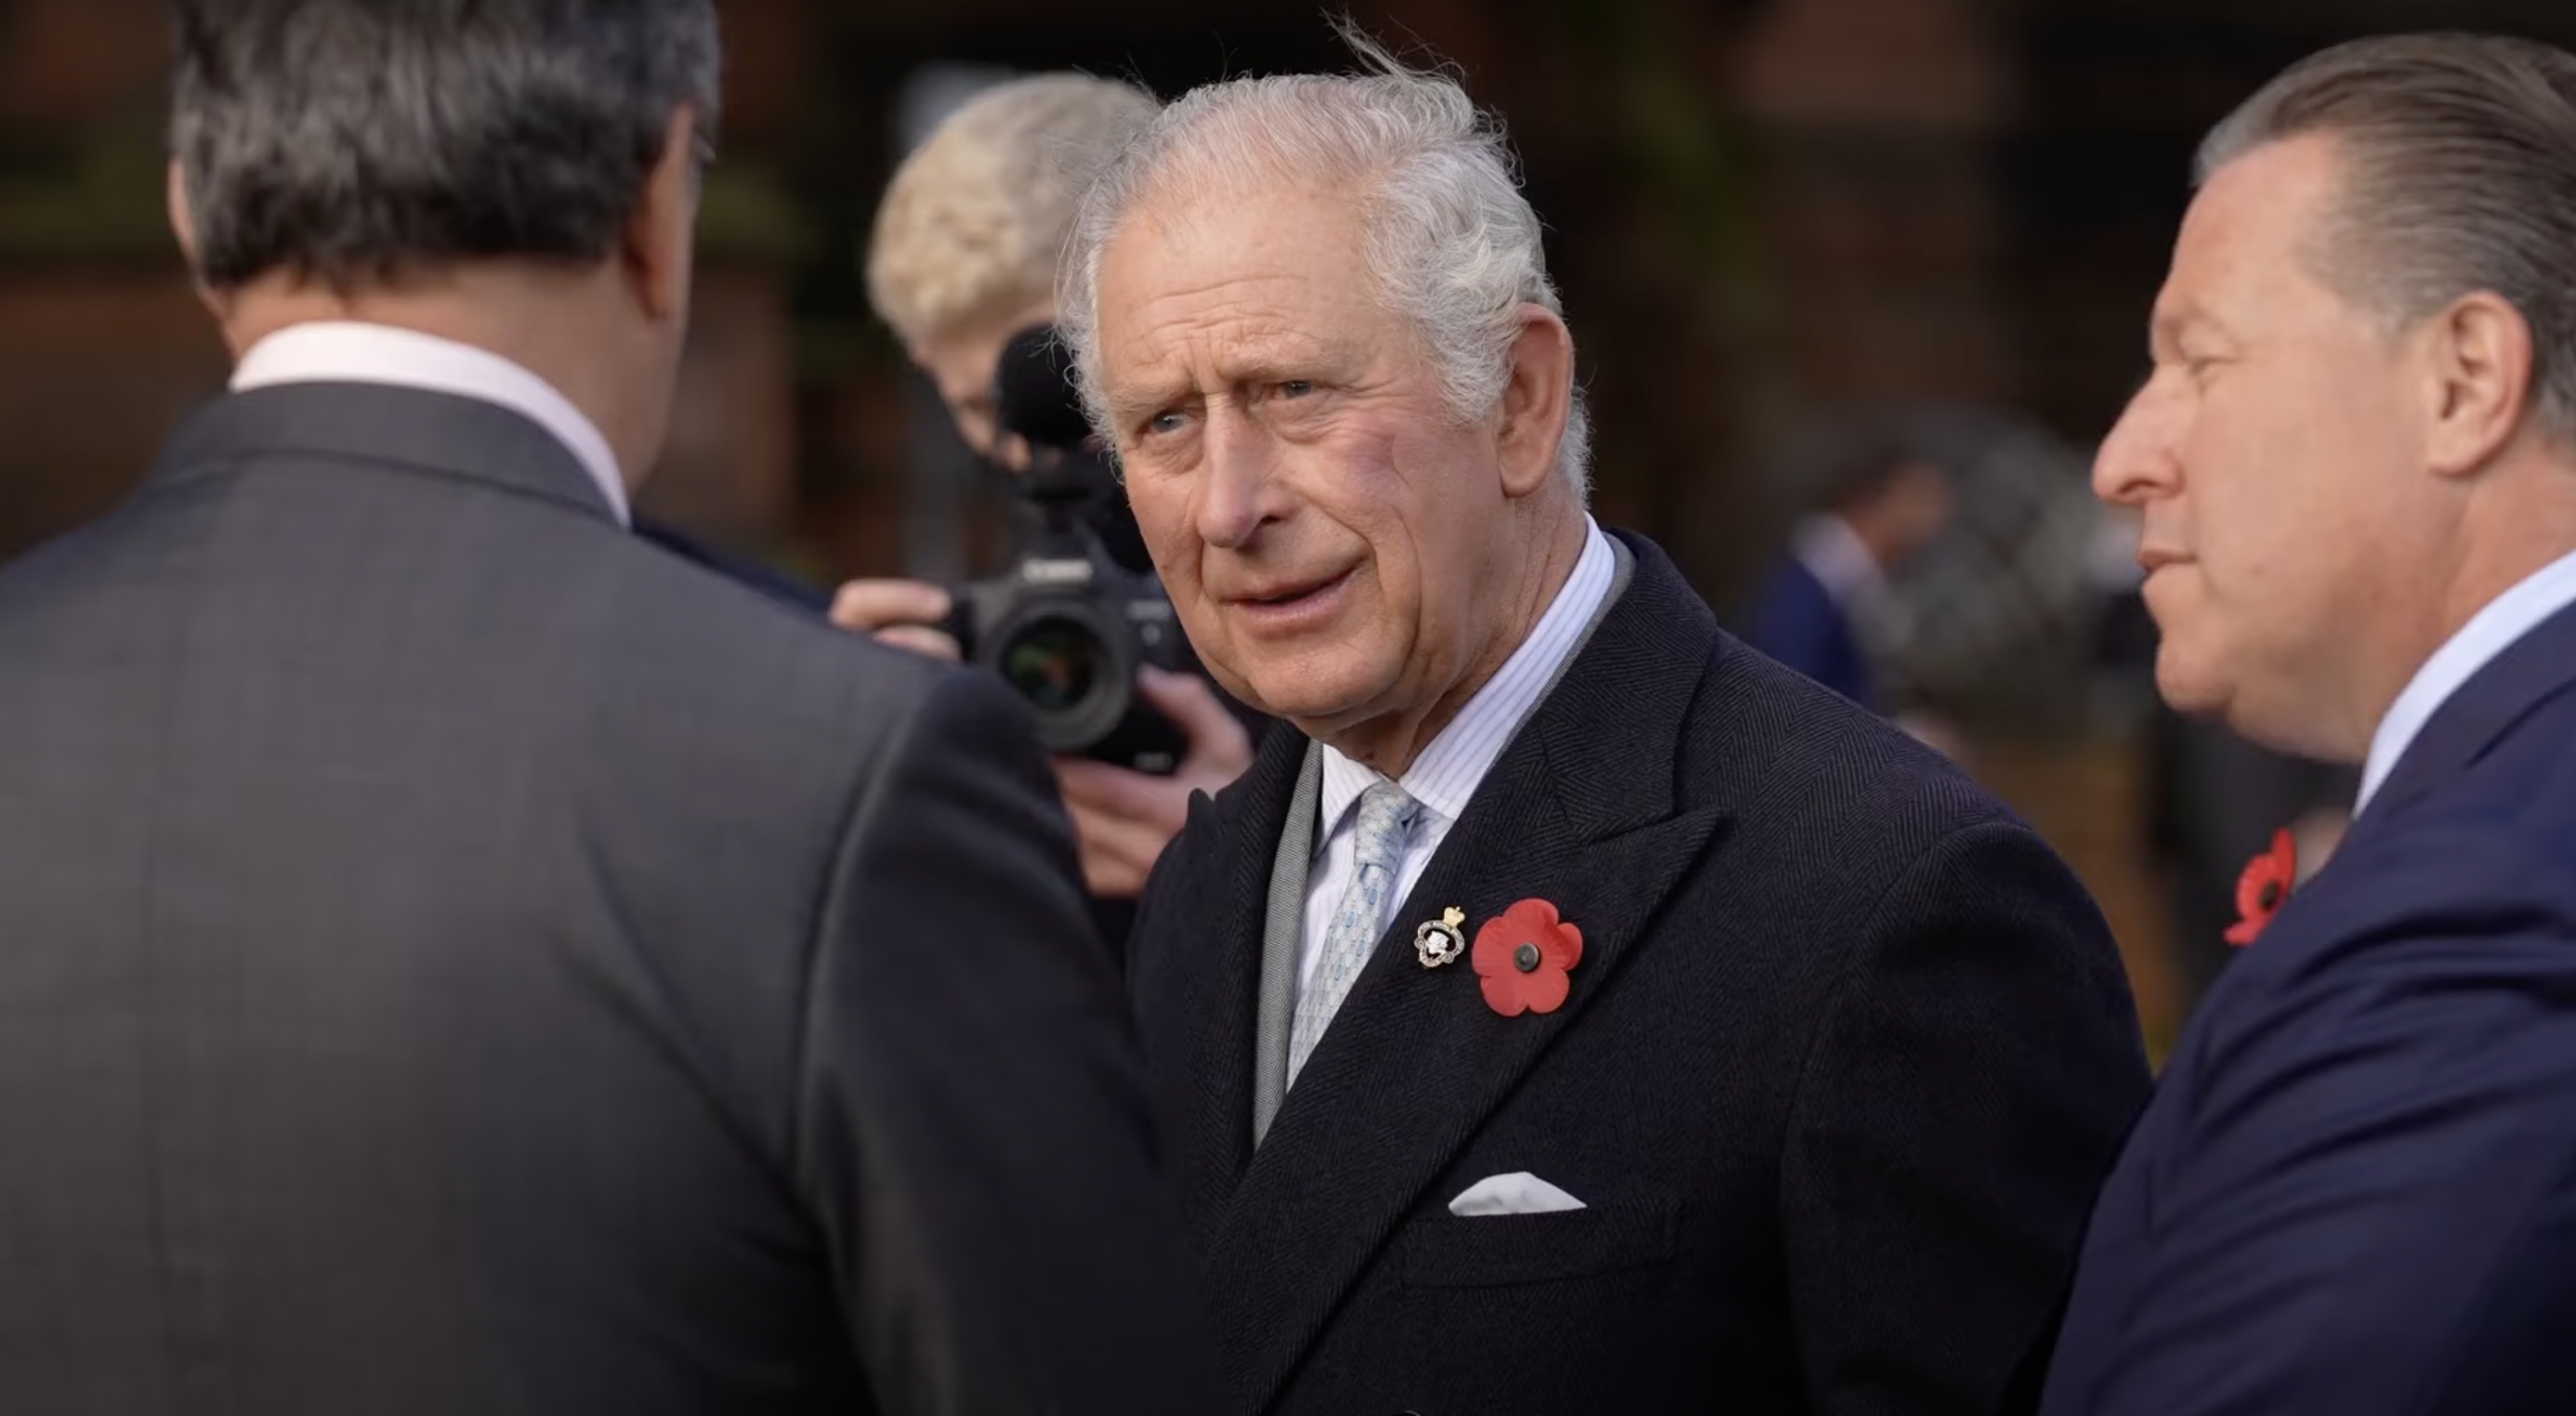 ‘Very Unwell’ King Charles’ Funeral Plans Reportedly Updated After Cancer Diagnosis